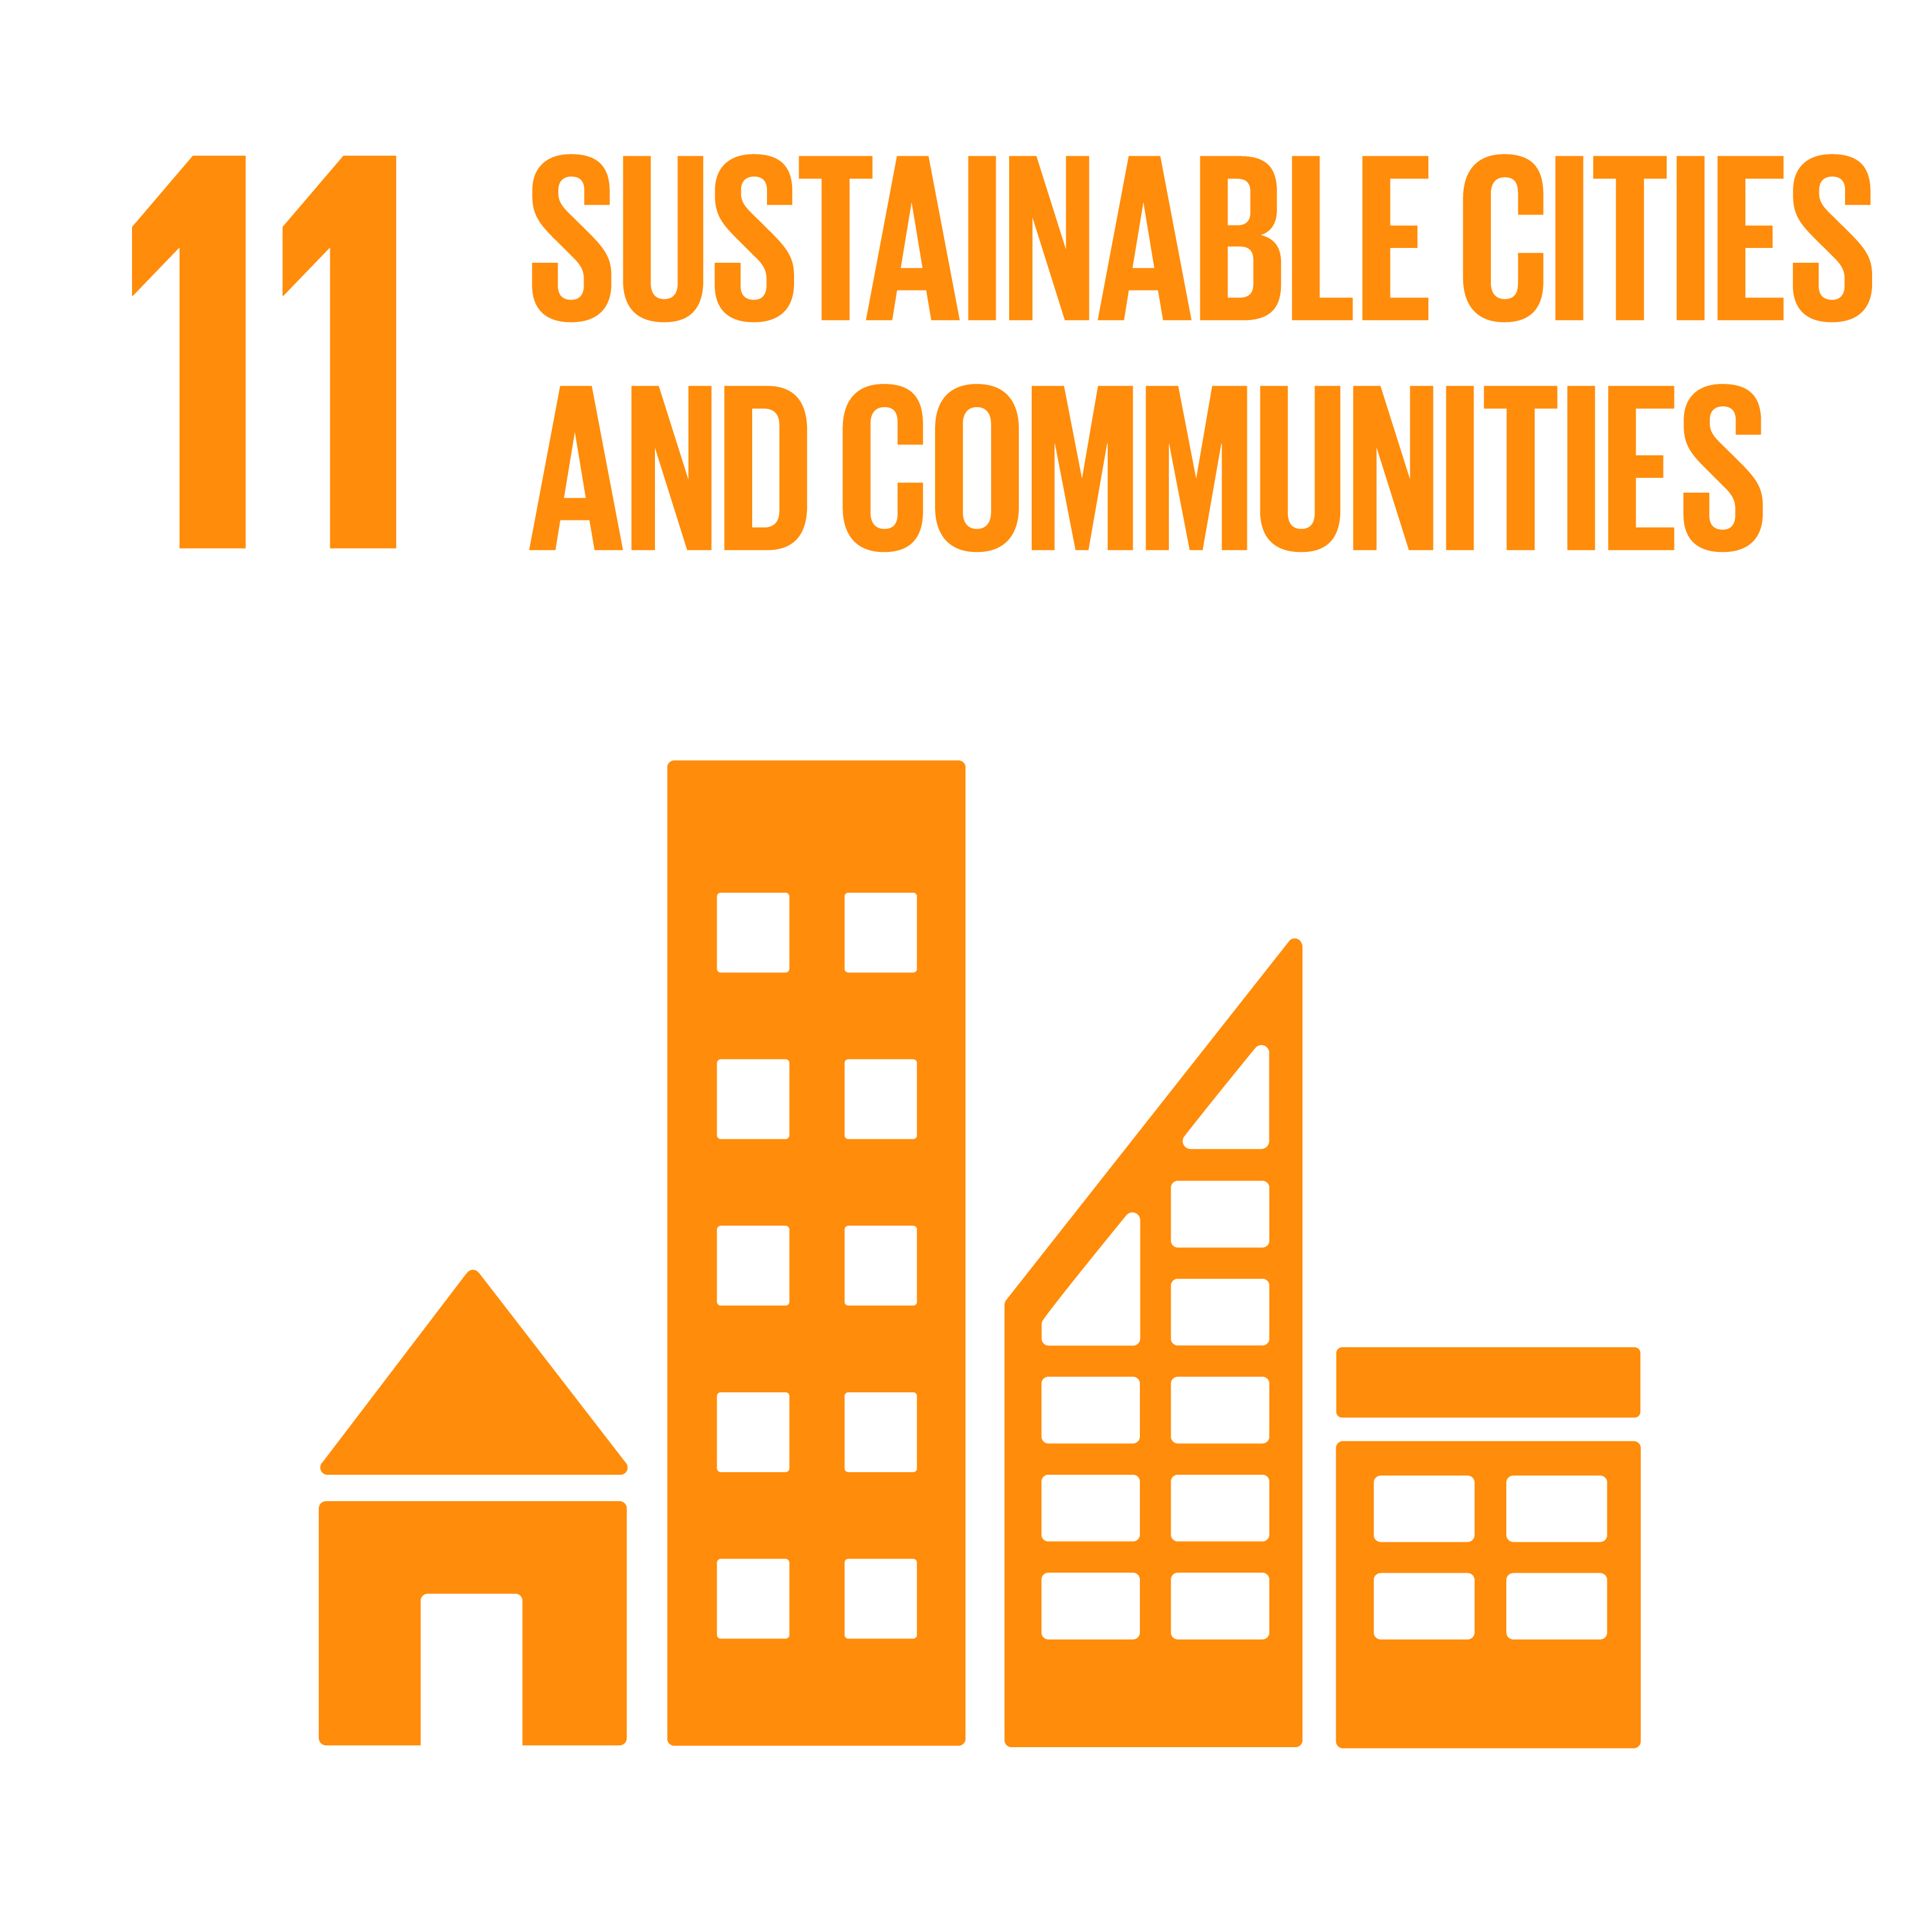 Sustainable development goals: Sustainable cities and communities